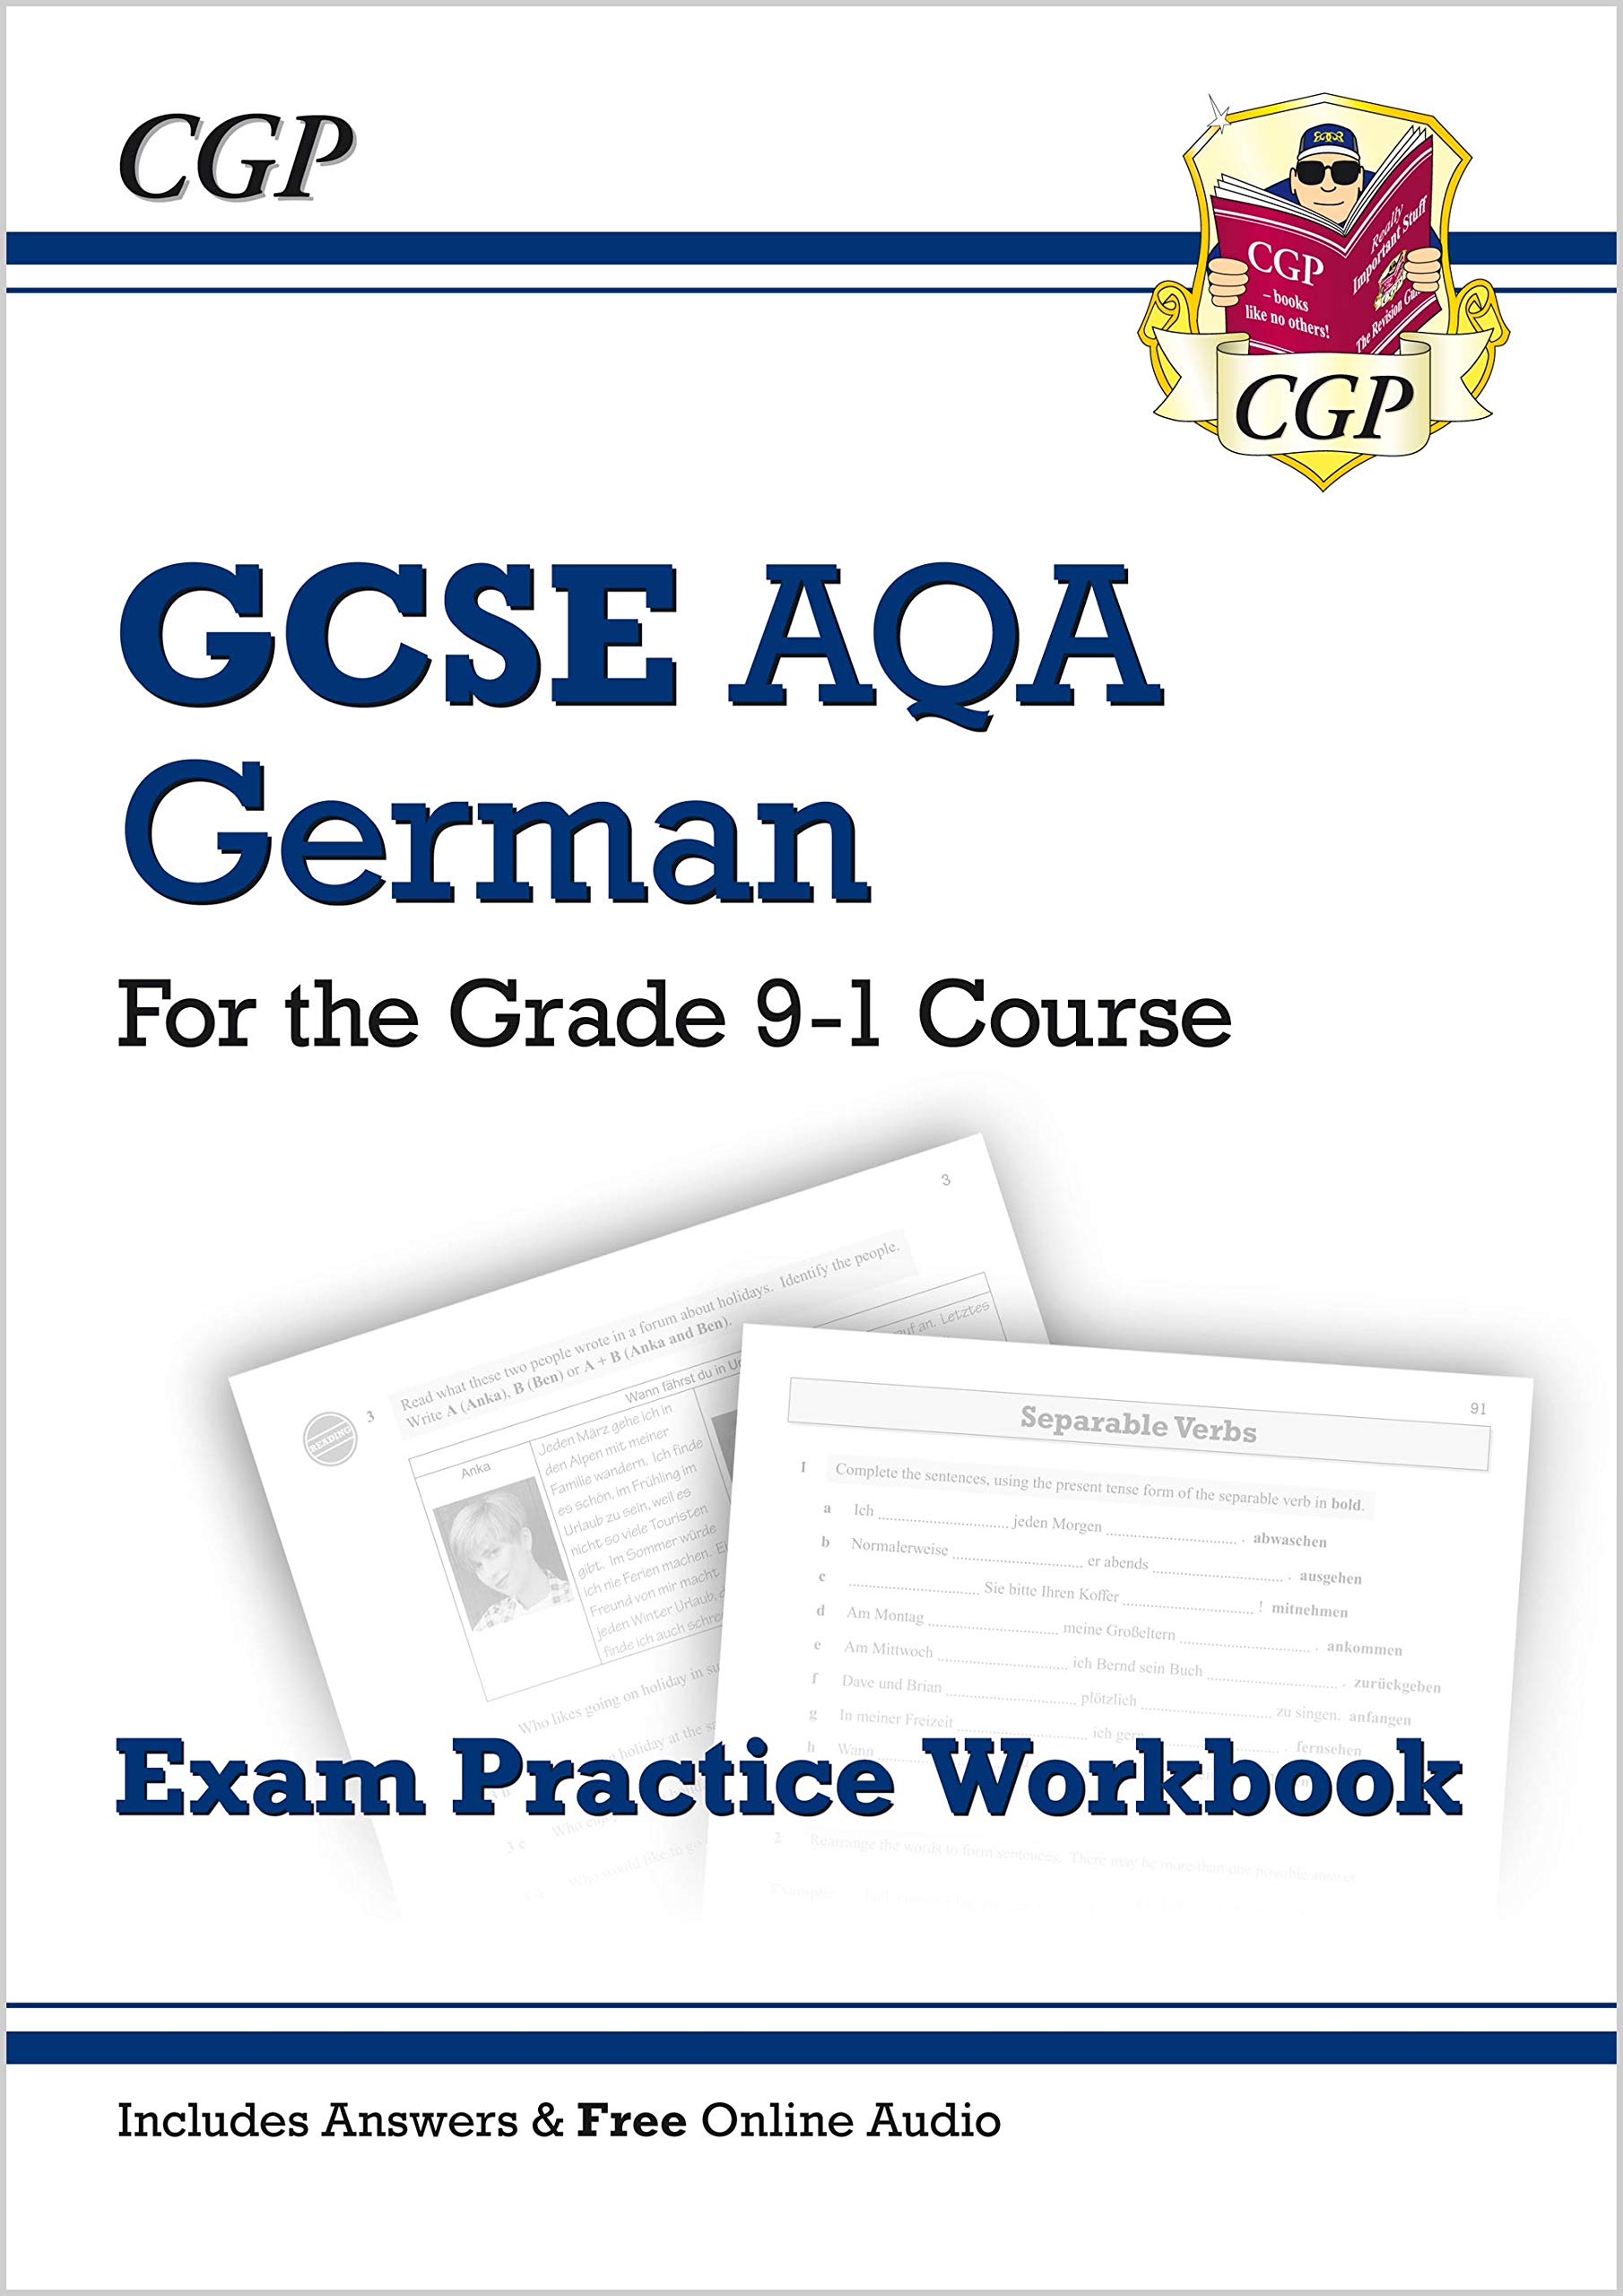 GCSE German AQA Exam Practice Workbook - For the Grade 9-1 Course (Includes Answers)